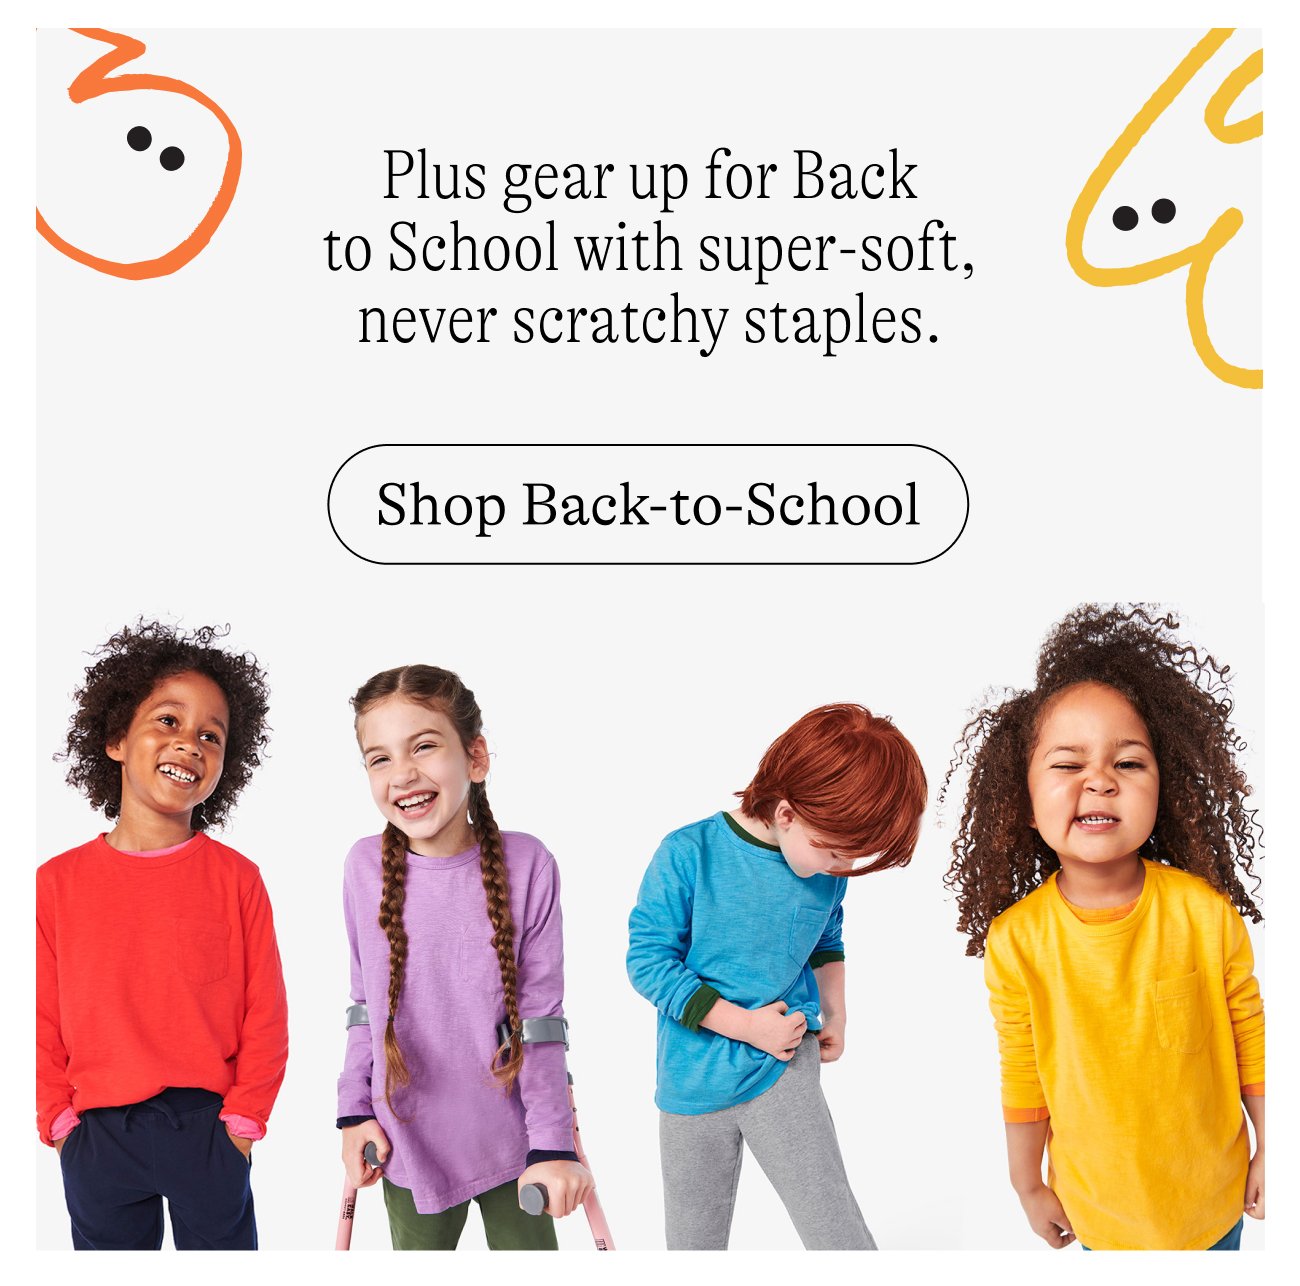 Plus gear up for Back to School with super-soft, never scratchy staples.. Shop Back-to-School.